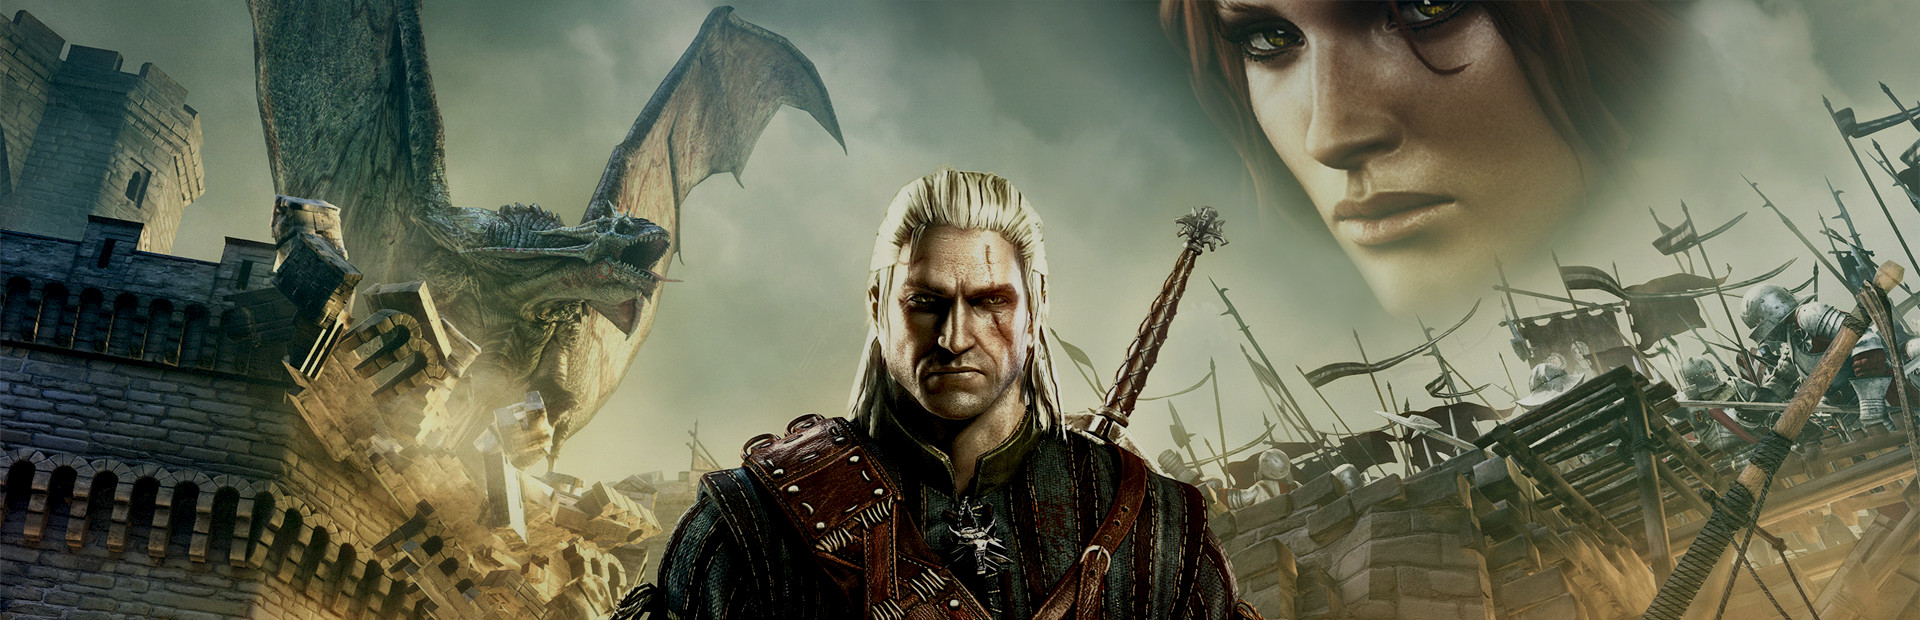 The Witcher 2: Assassins of Kings Enhanced Edition cover image